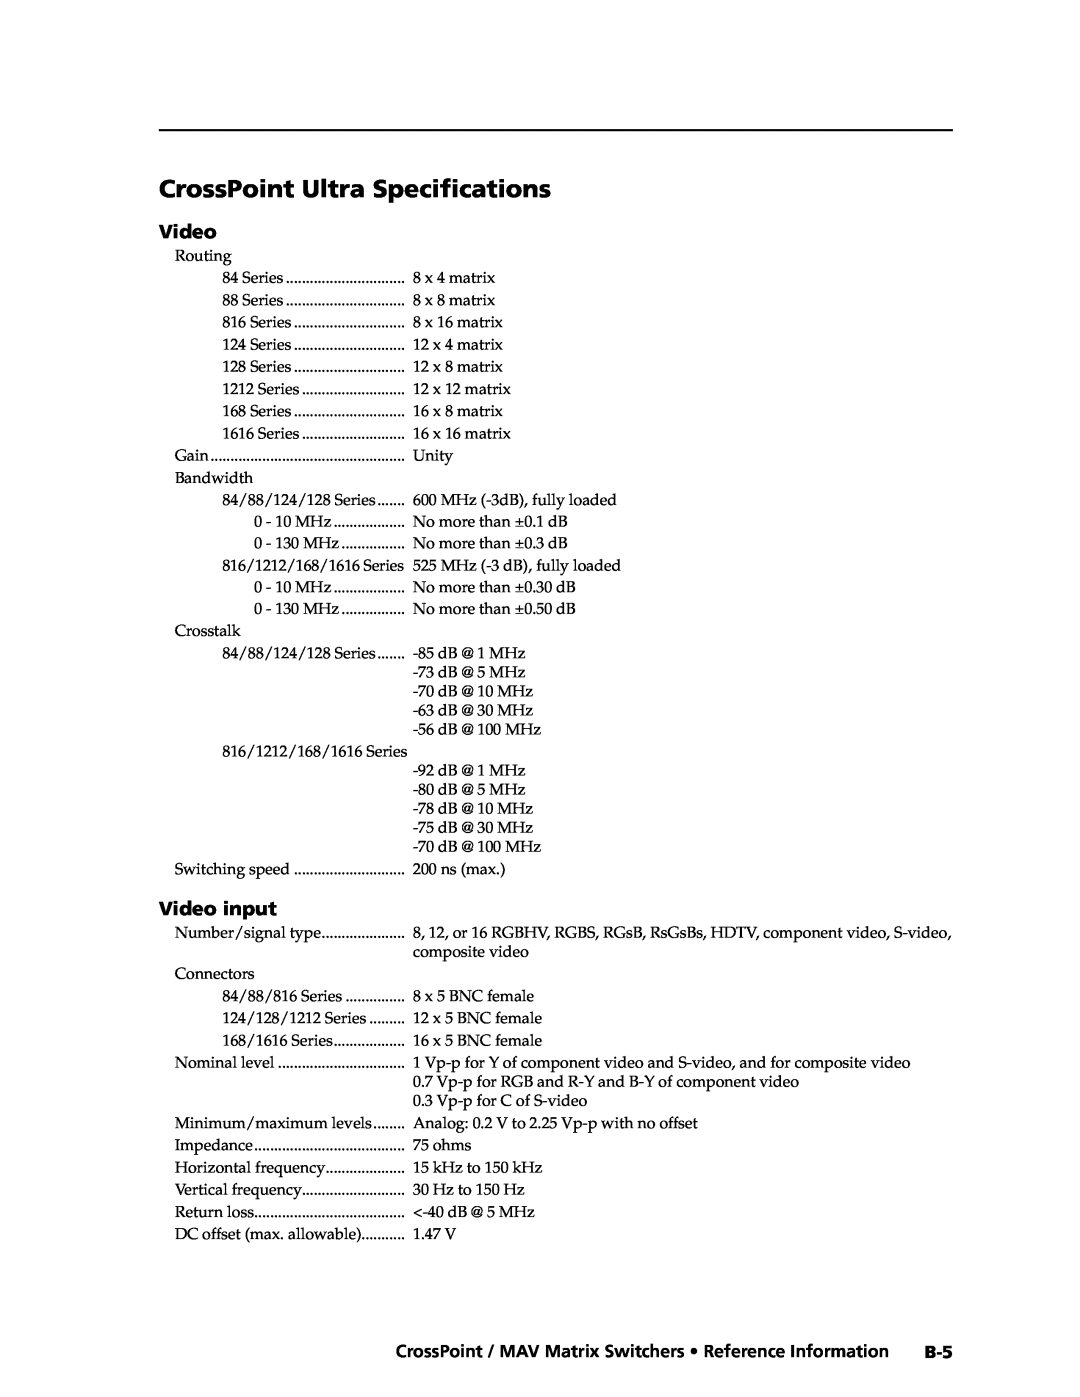 Extron electronic Ultra Series, MAV Plus Series manual CrossPoint Ultra Specifications, Video input 